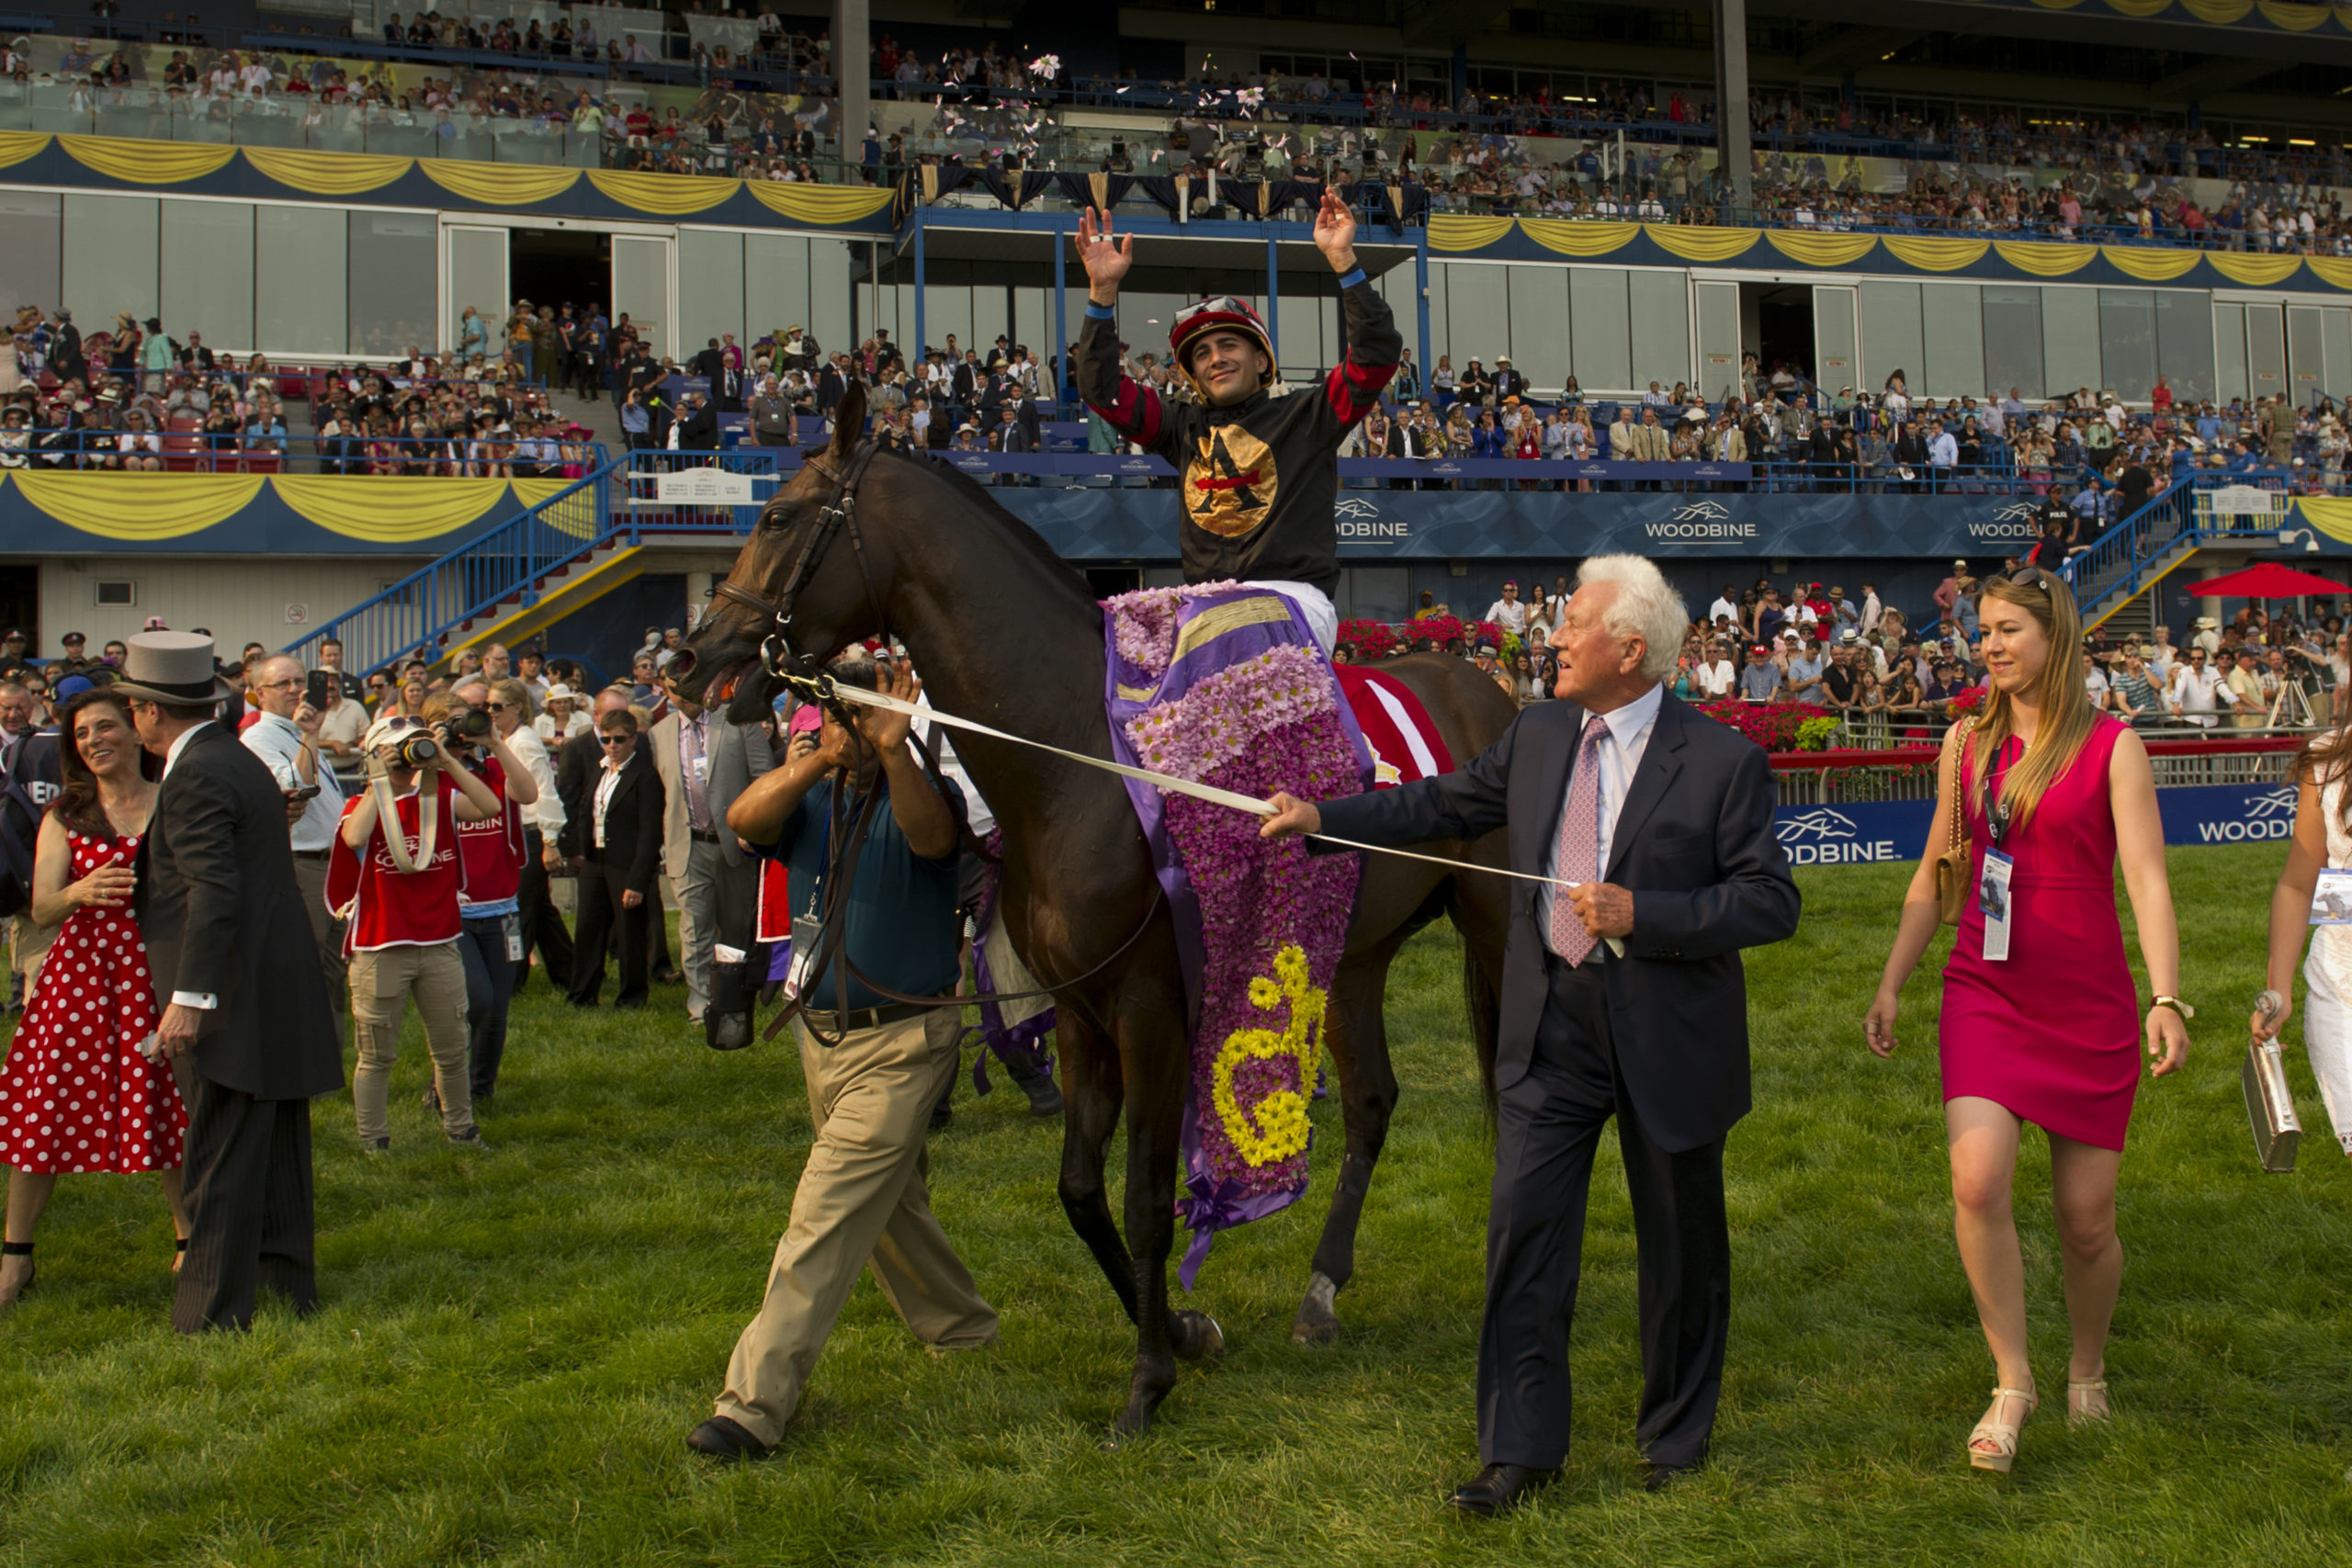 Queen's Plate Stakes winner Shaman Ghost with jockey Rafael Hernandez and owner Frank Stronach.Photo by Michael Burns Photography